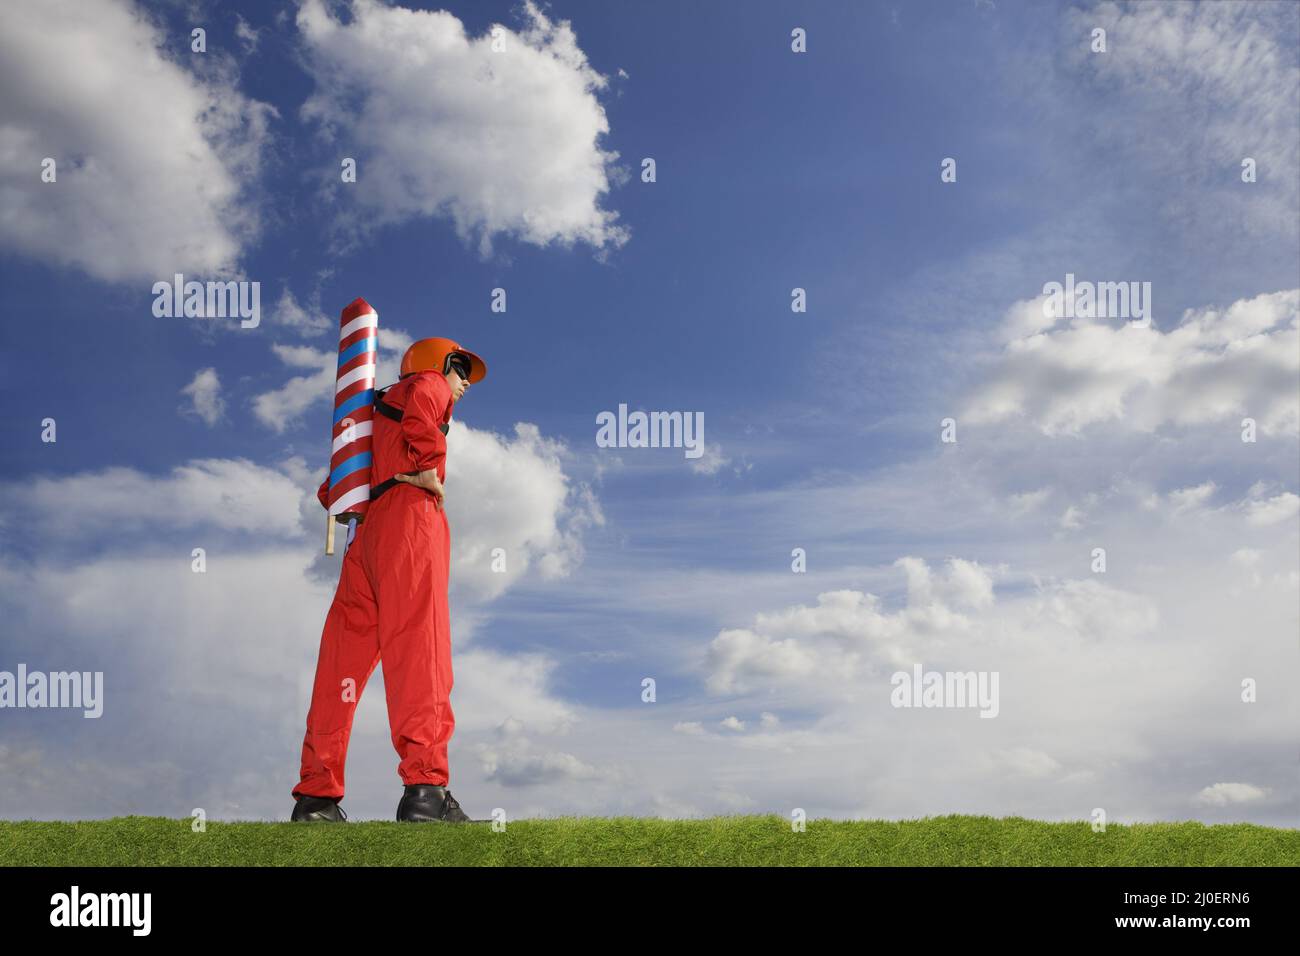 A man with a rocket strapped to his back ready for take off Stock Photo